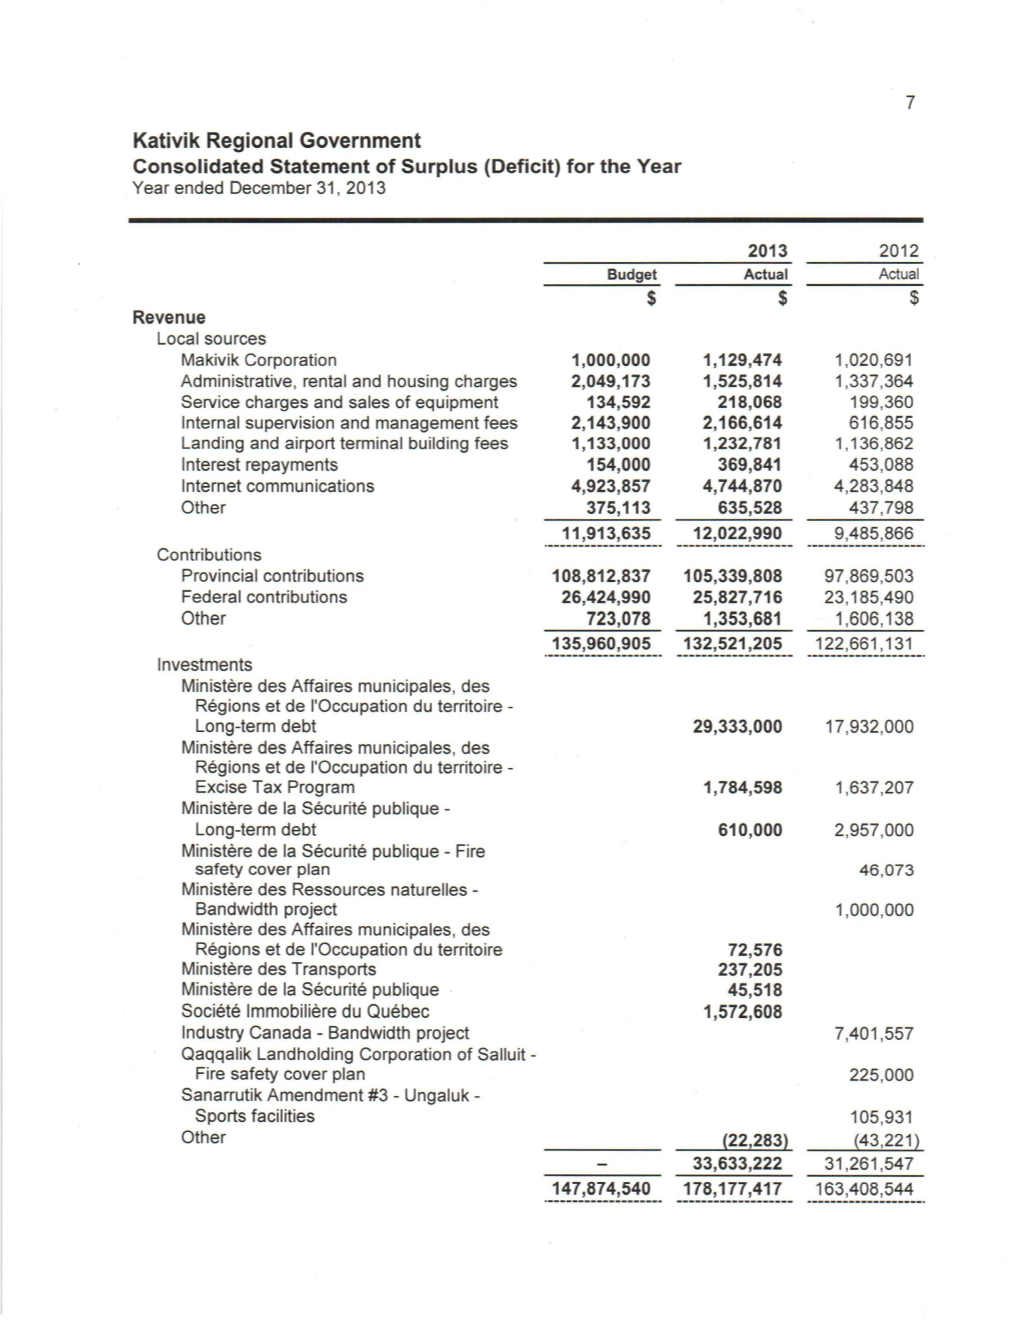 Kativik Regional Government Consolidated Statement of Surplus (Deficit) for the Year Year Ended December 31, 2013